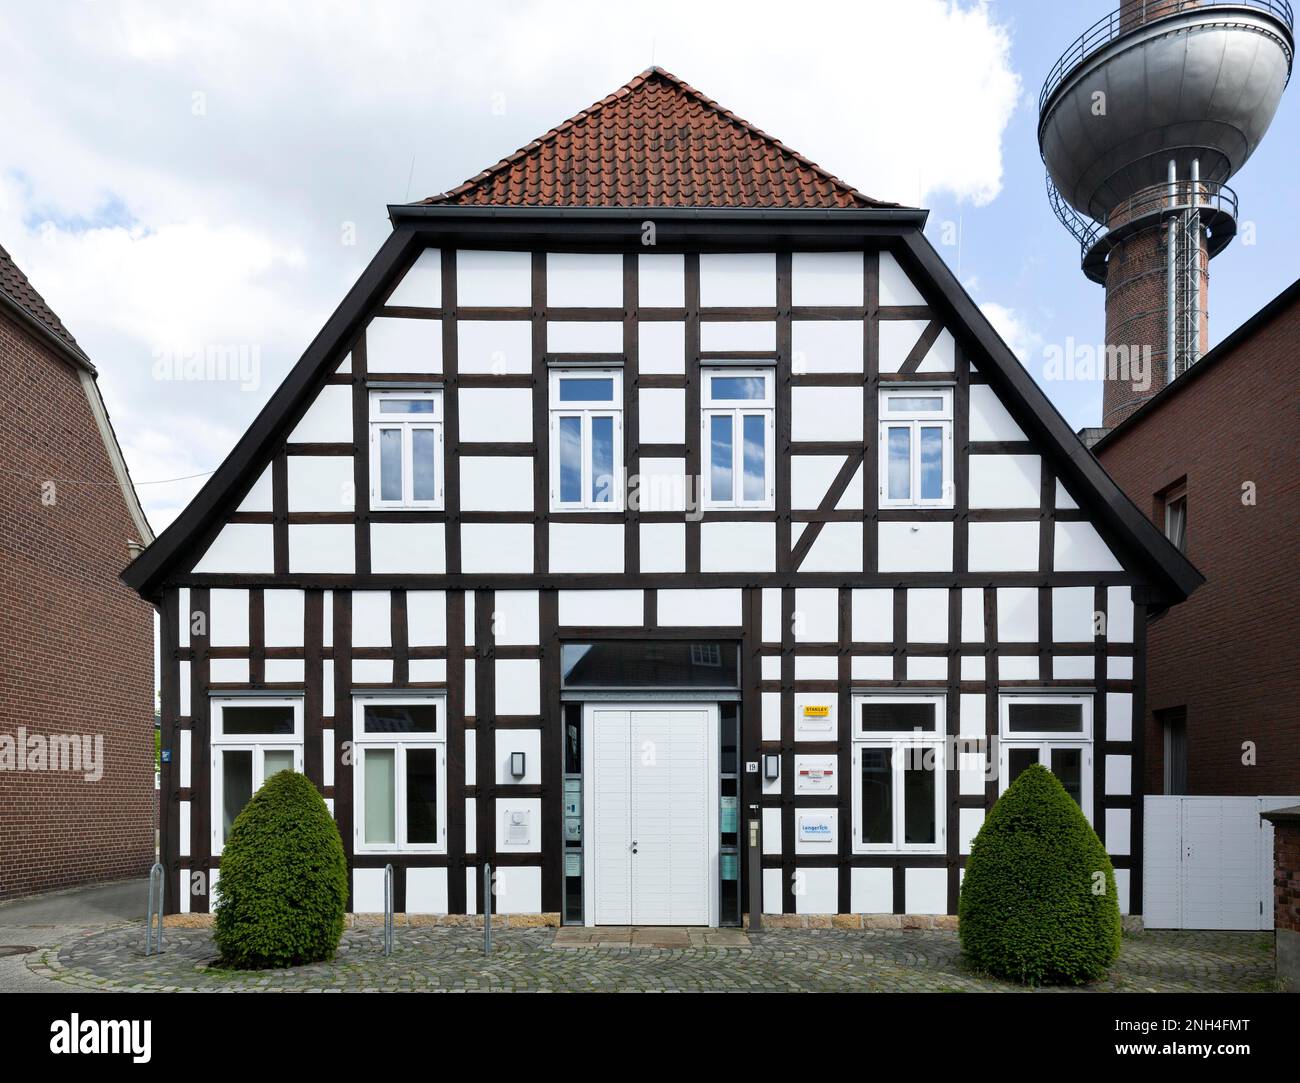 Old pastorate, former rectory from 1721 with modern conversions, Lengerich, North Rhine-Westphalia, Germany Stock Photo